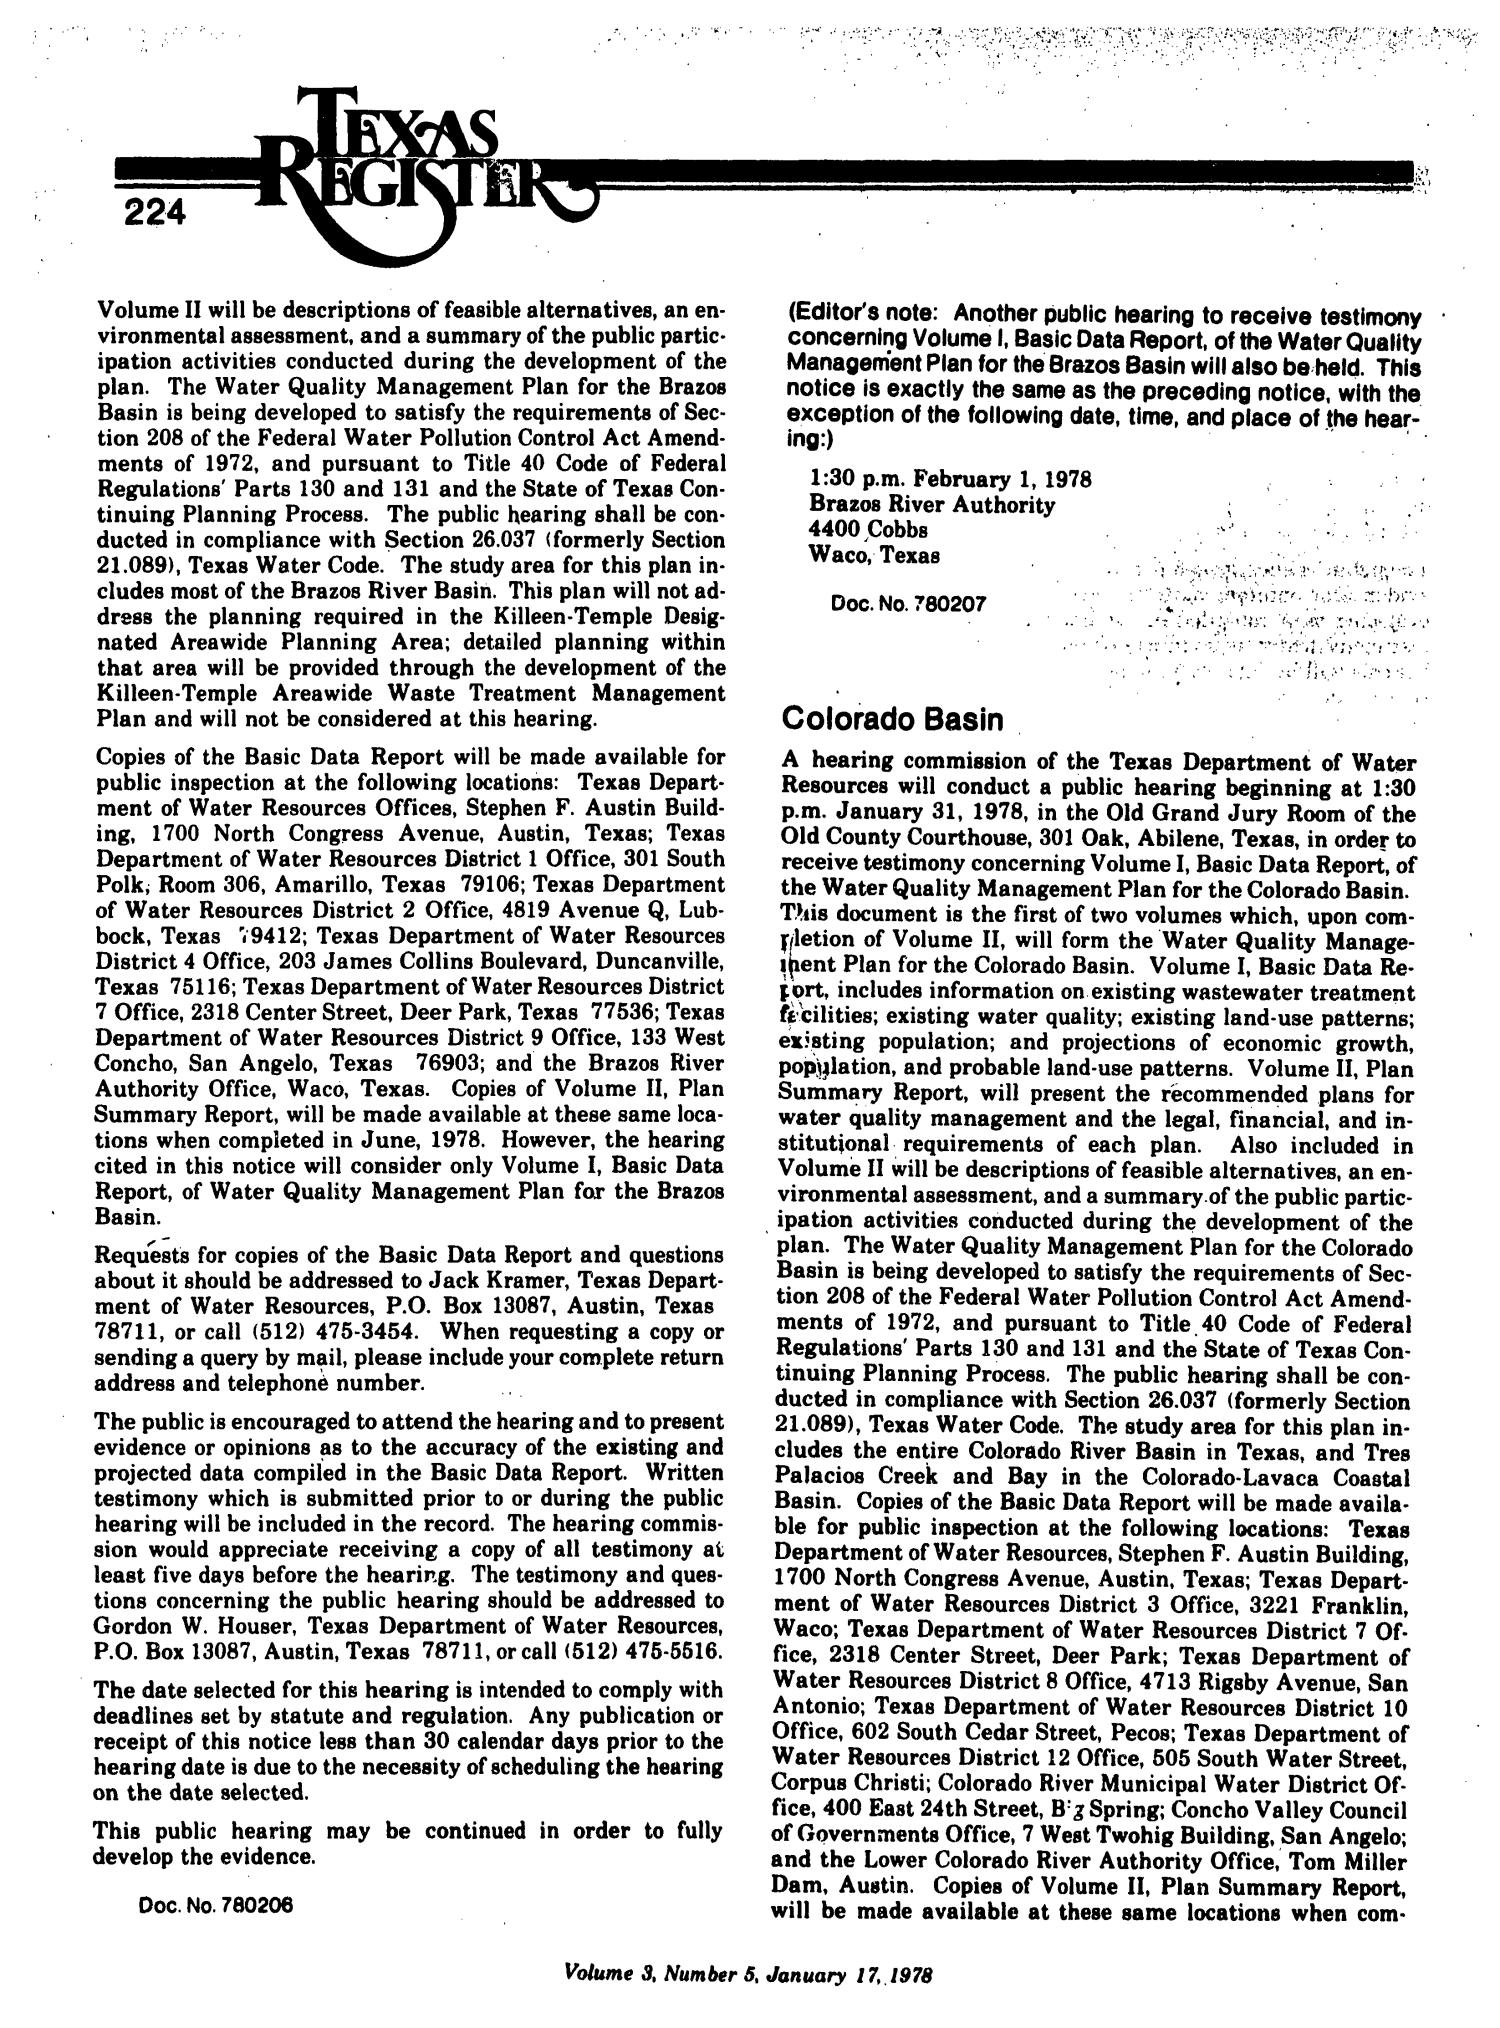 Texas Register, Volume 3, Number 5, Pages 183-226, January 17, 1978
                                                
                                                    224
                                                